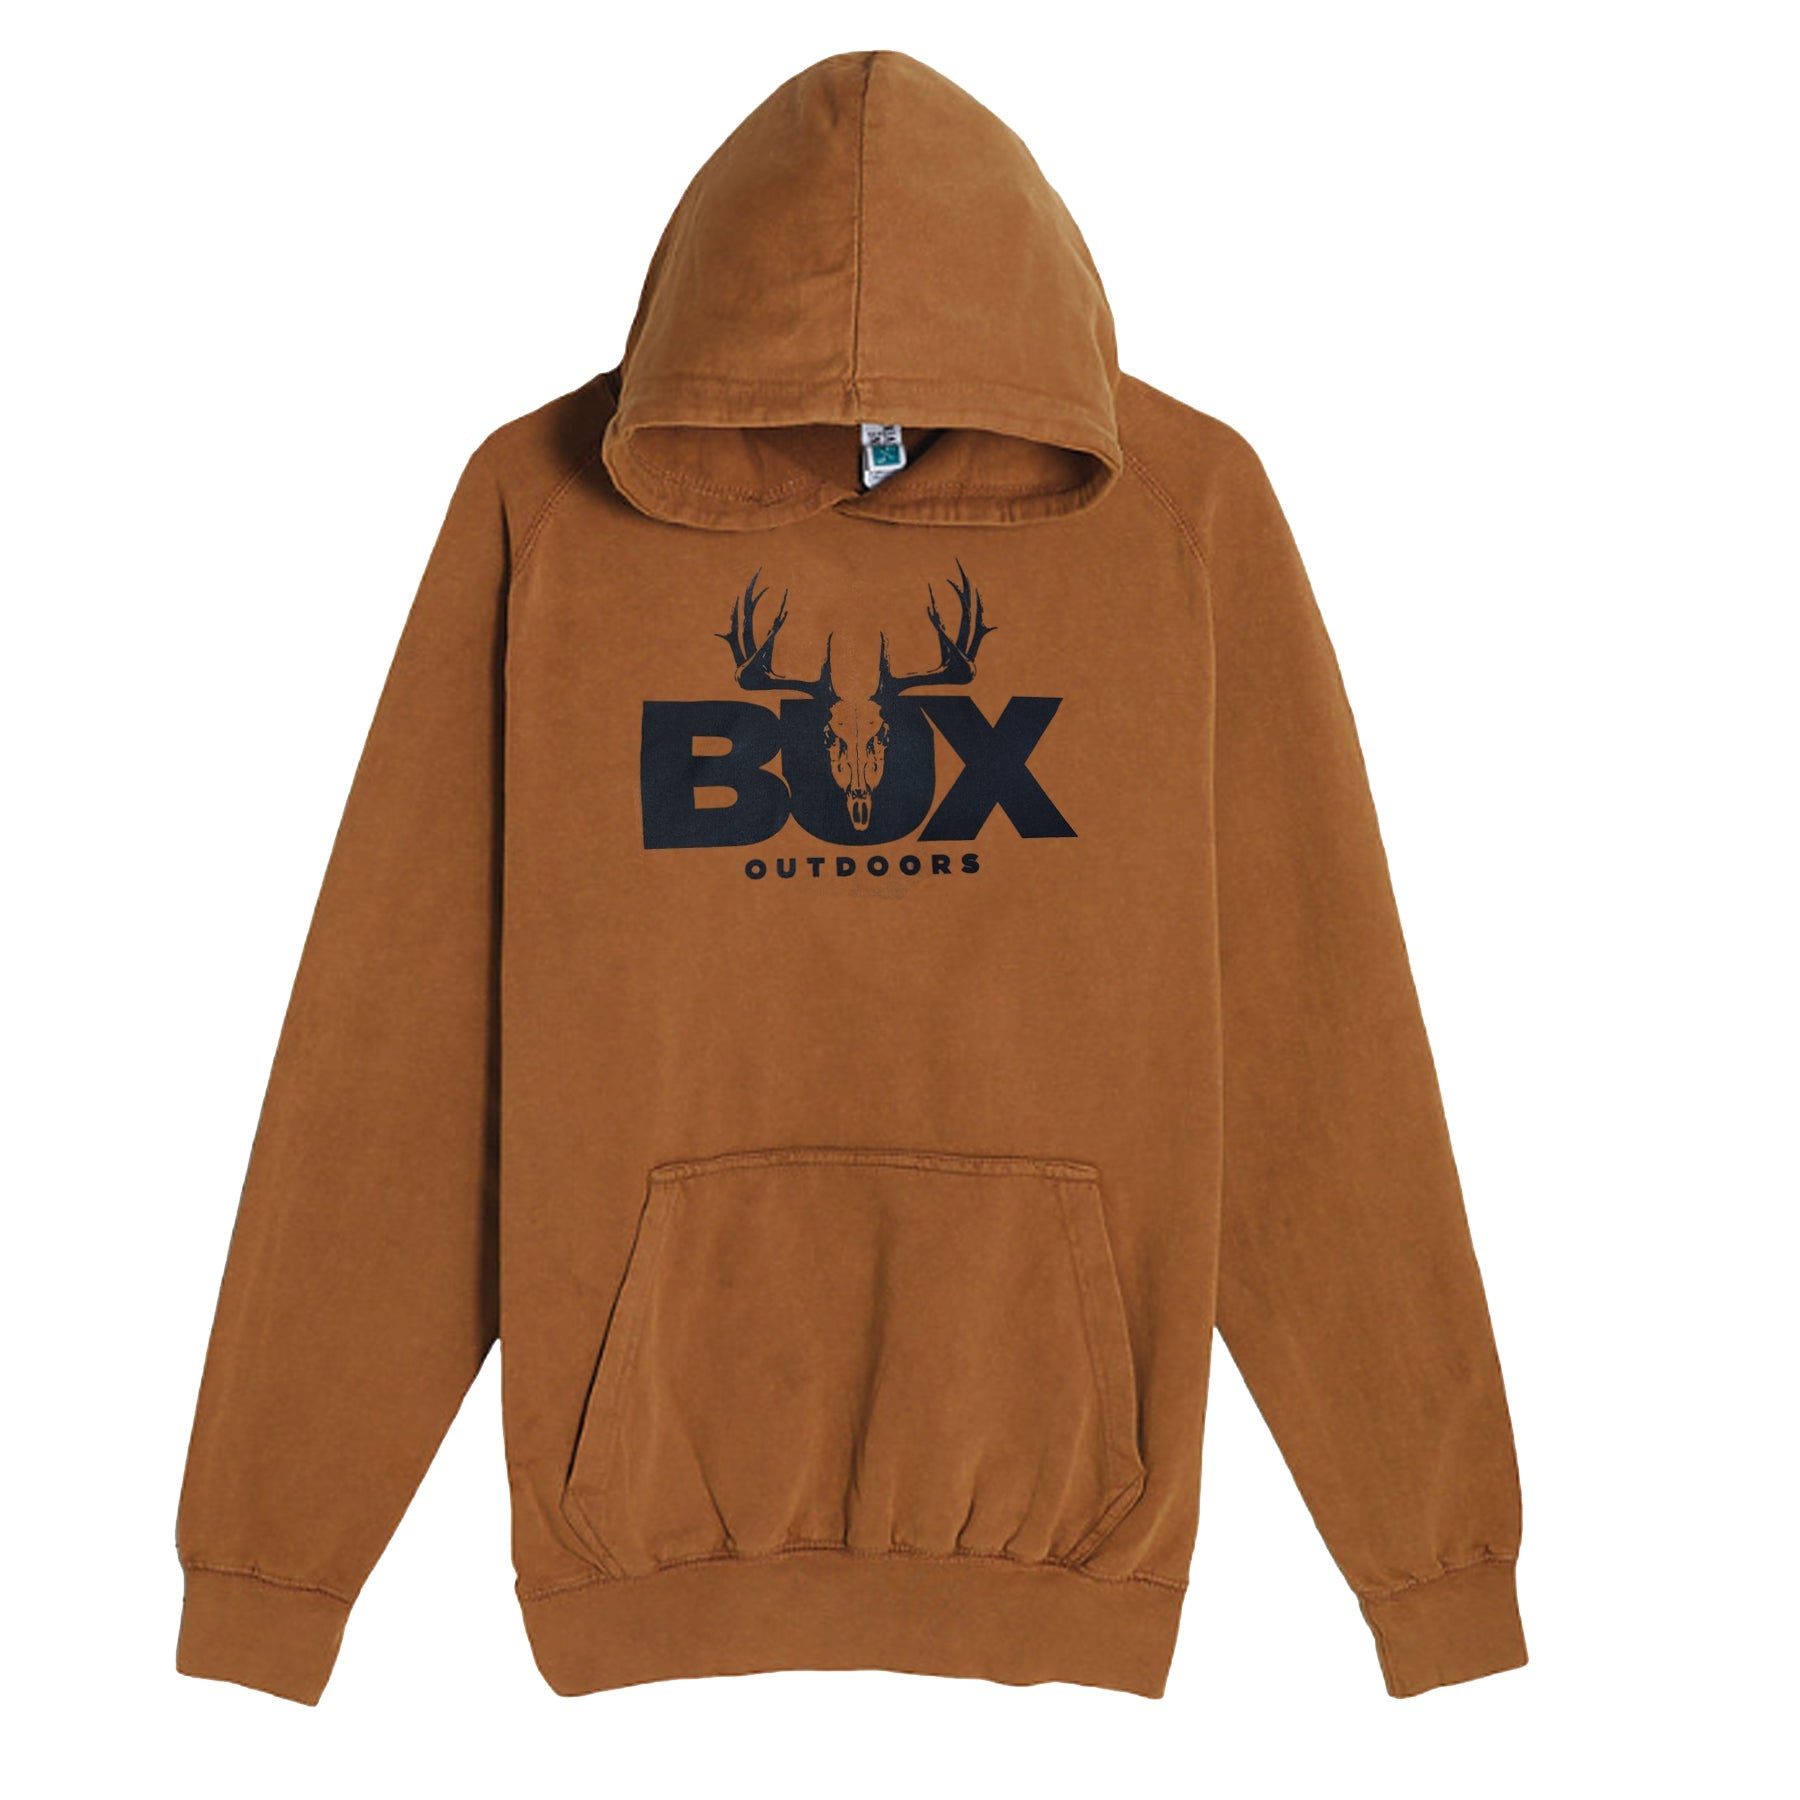 Bux Outdoors